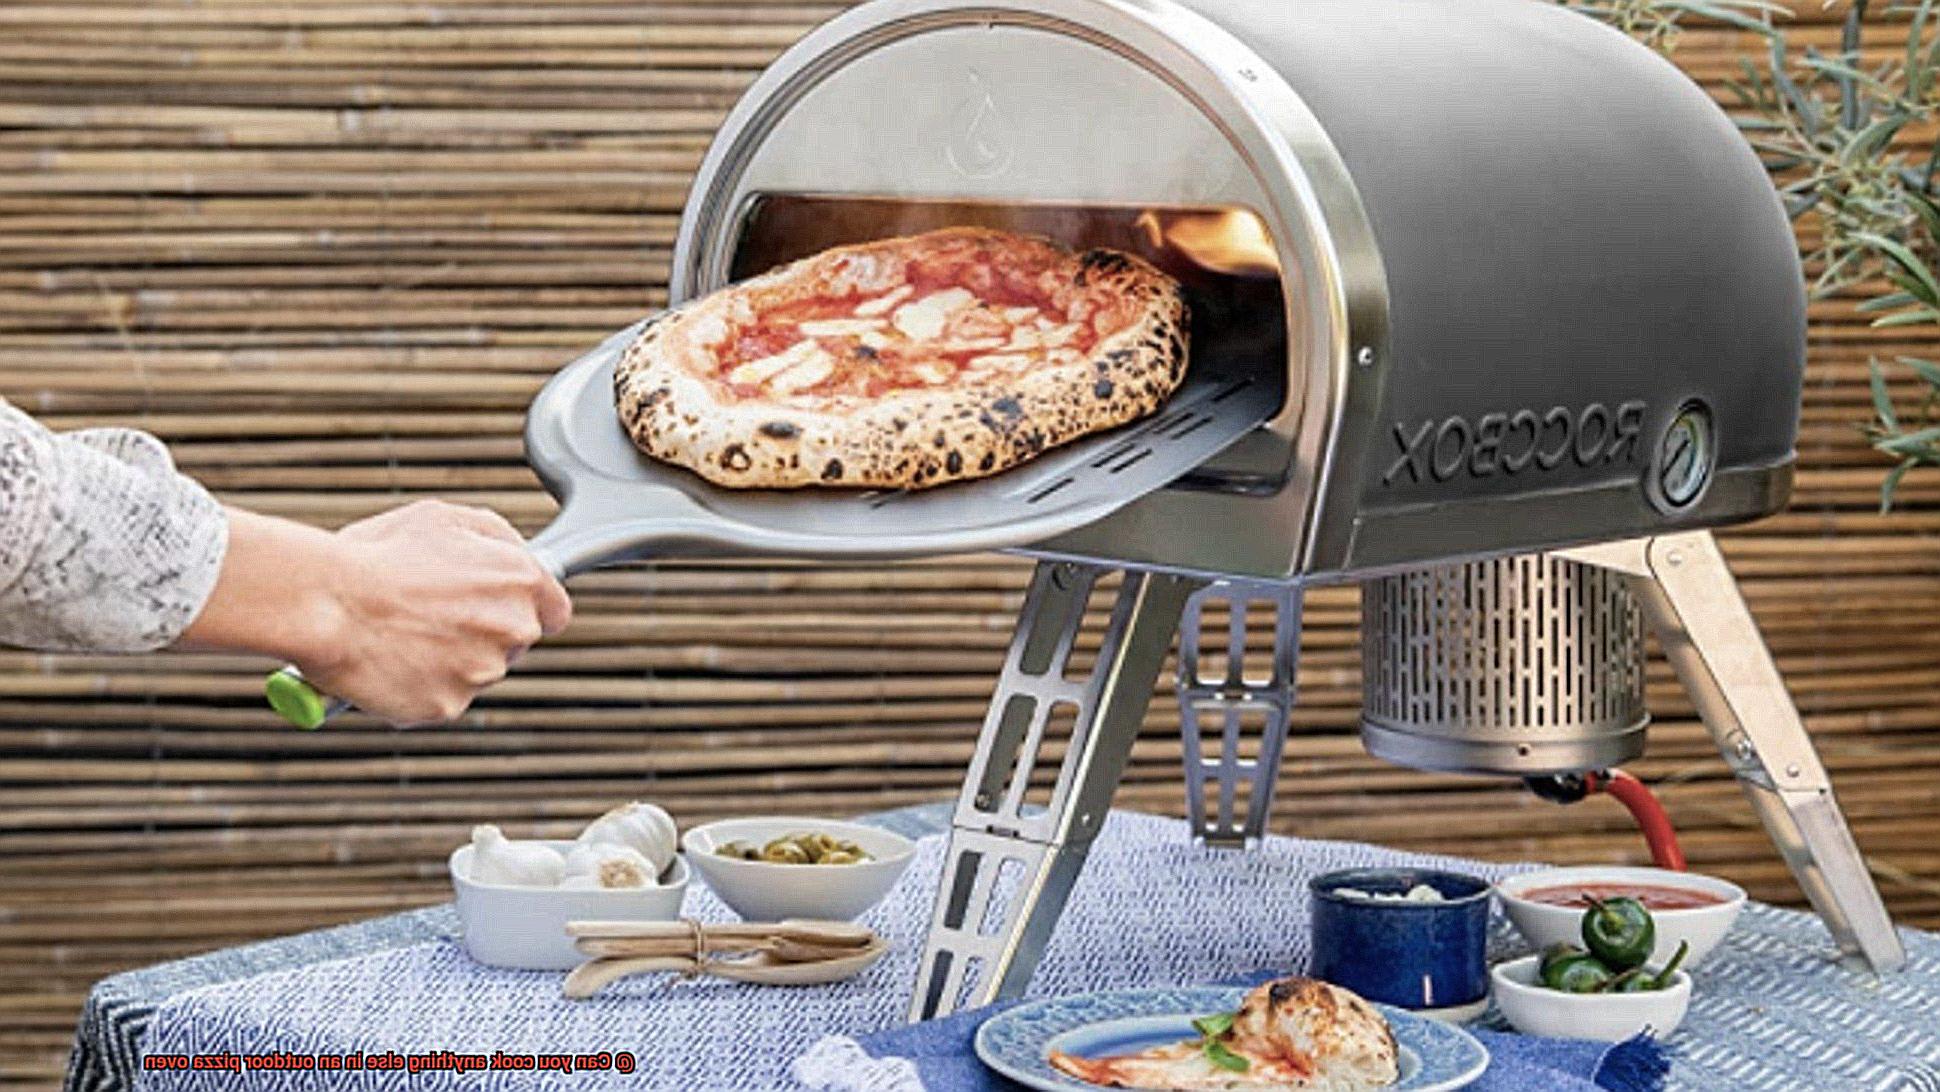 Can you cook anything else in an outdoor pizza oven-4